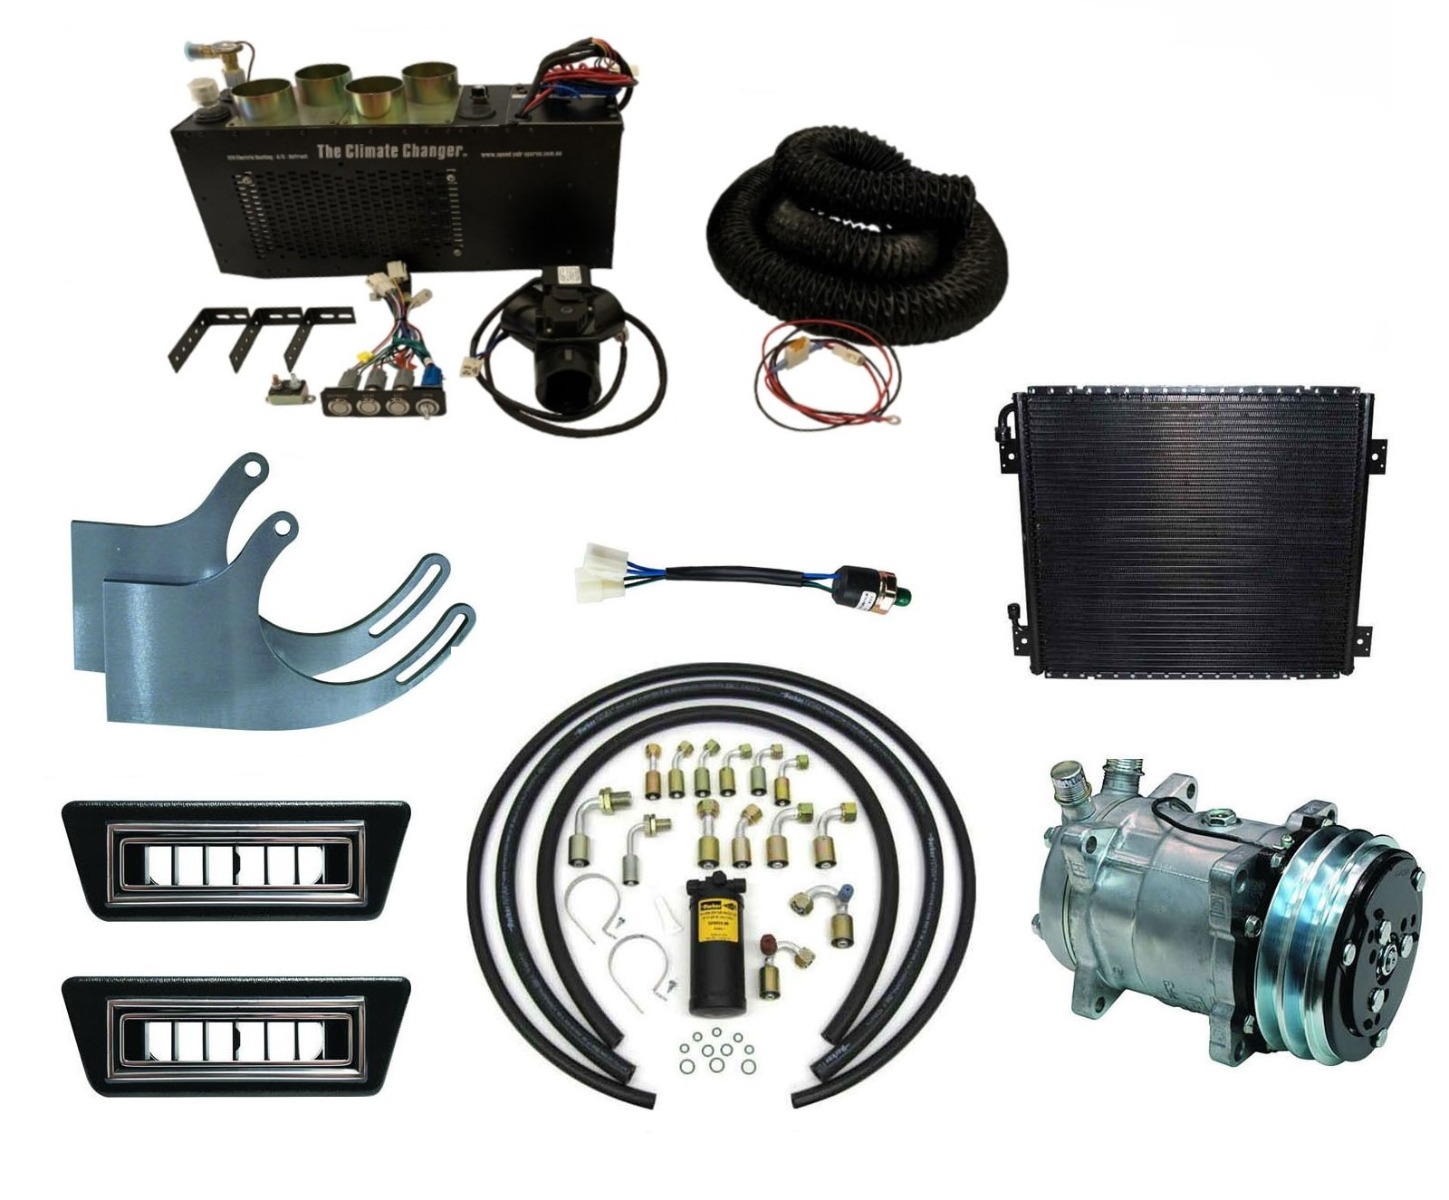 CHRYSLER VALIANT VE-VF-VG 6 CYL A/C SYSTEM HEAT/COOL/DEFROST COMPLETE PACKAGE (ELECTRIC HEAT)